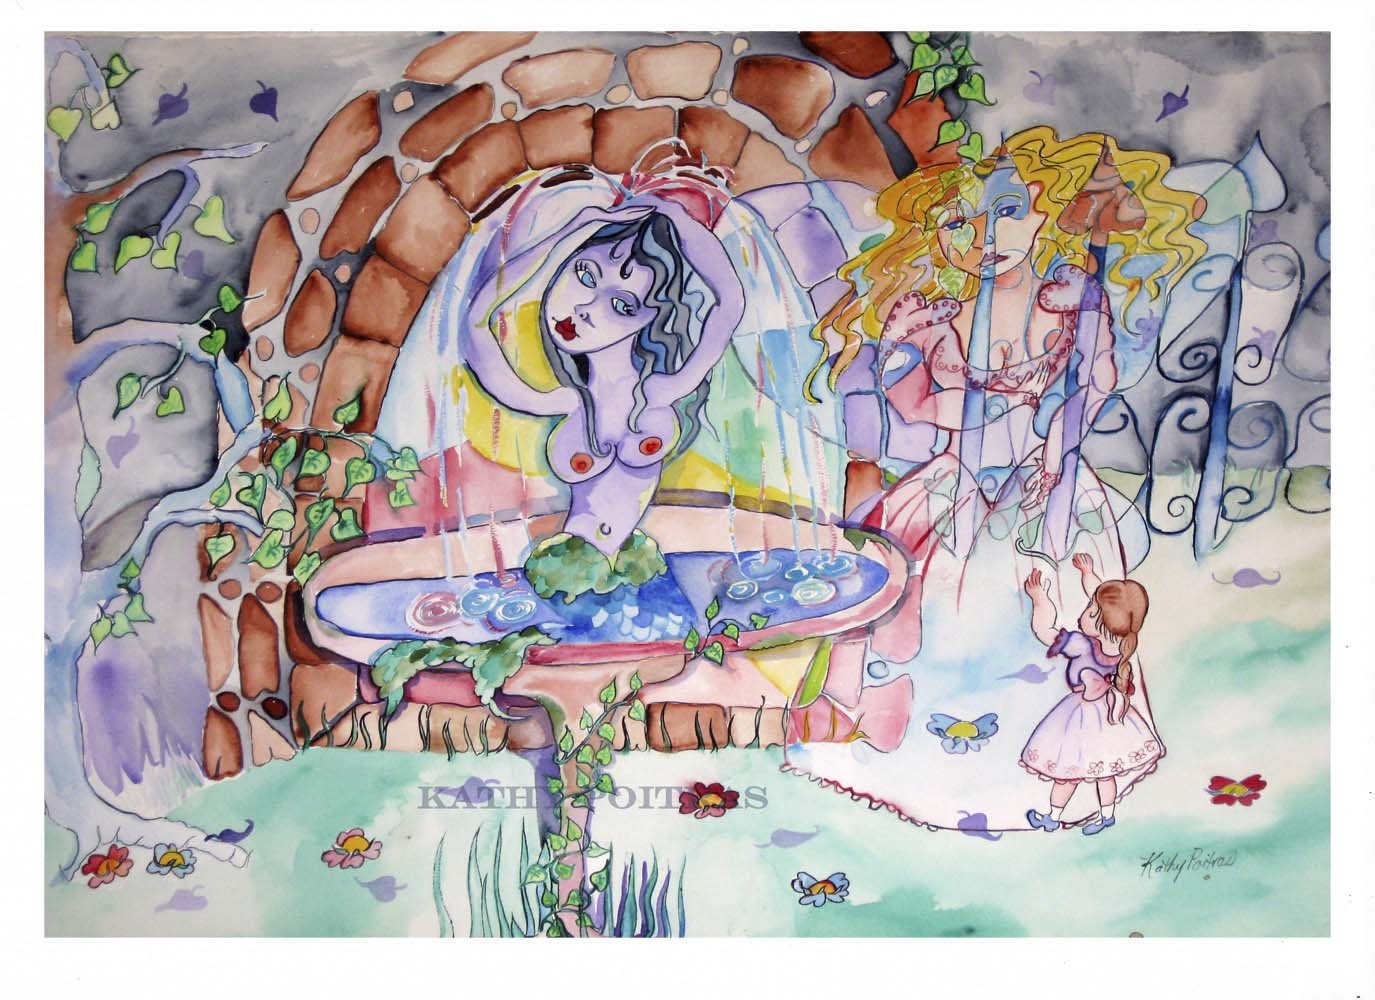 Naive fantasy painting. A mermaid sits in a fountain, there is a ghost of a lady and a little girl in the whimsical garden created from the imagination of artist Kathy Poitras